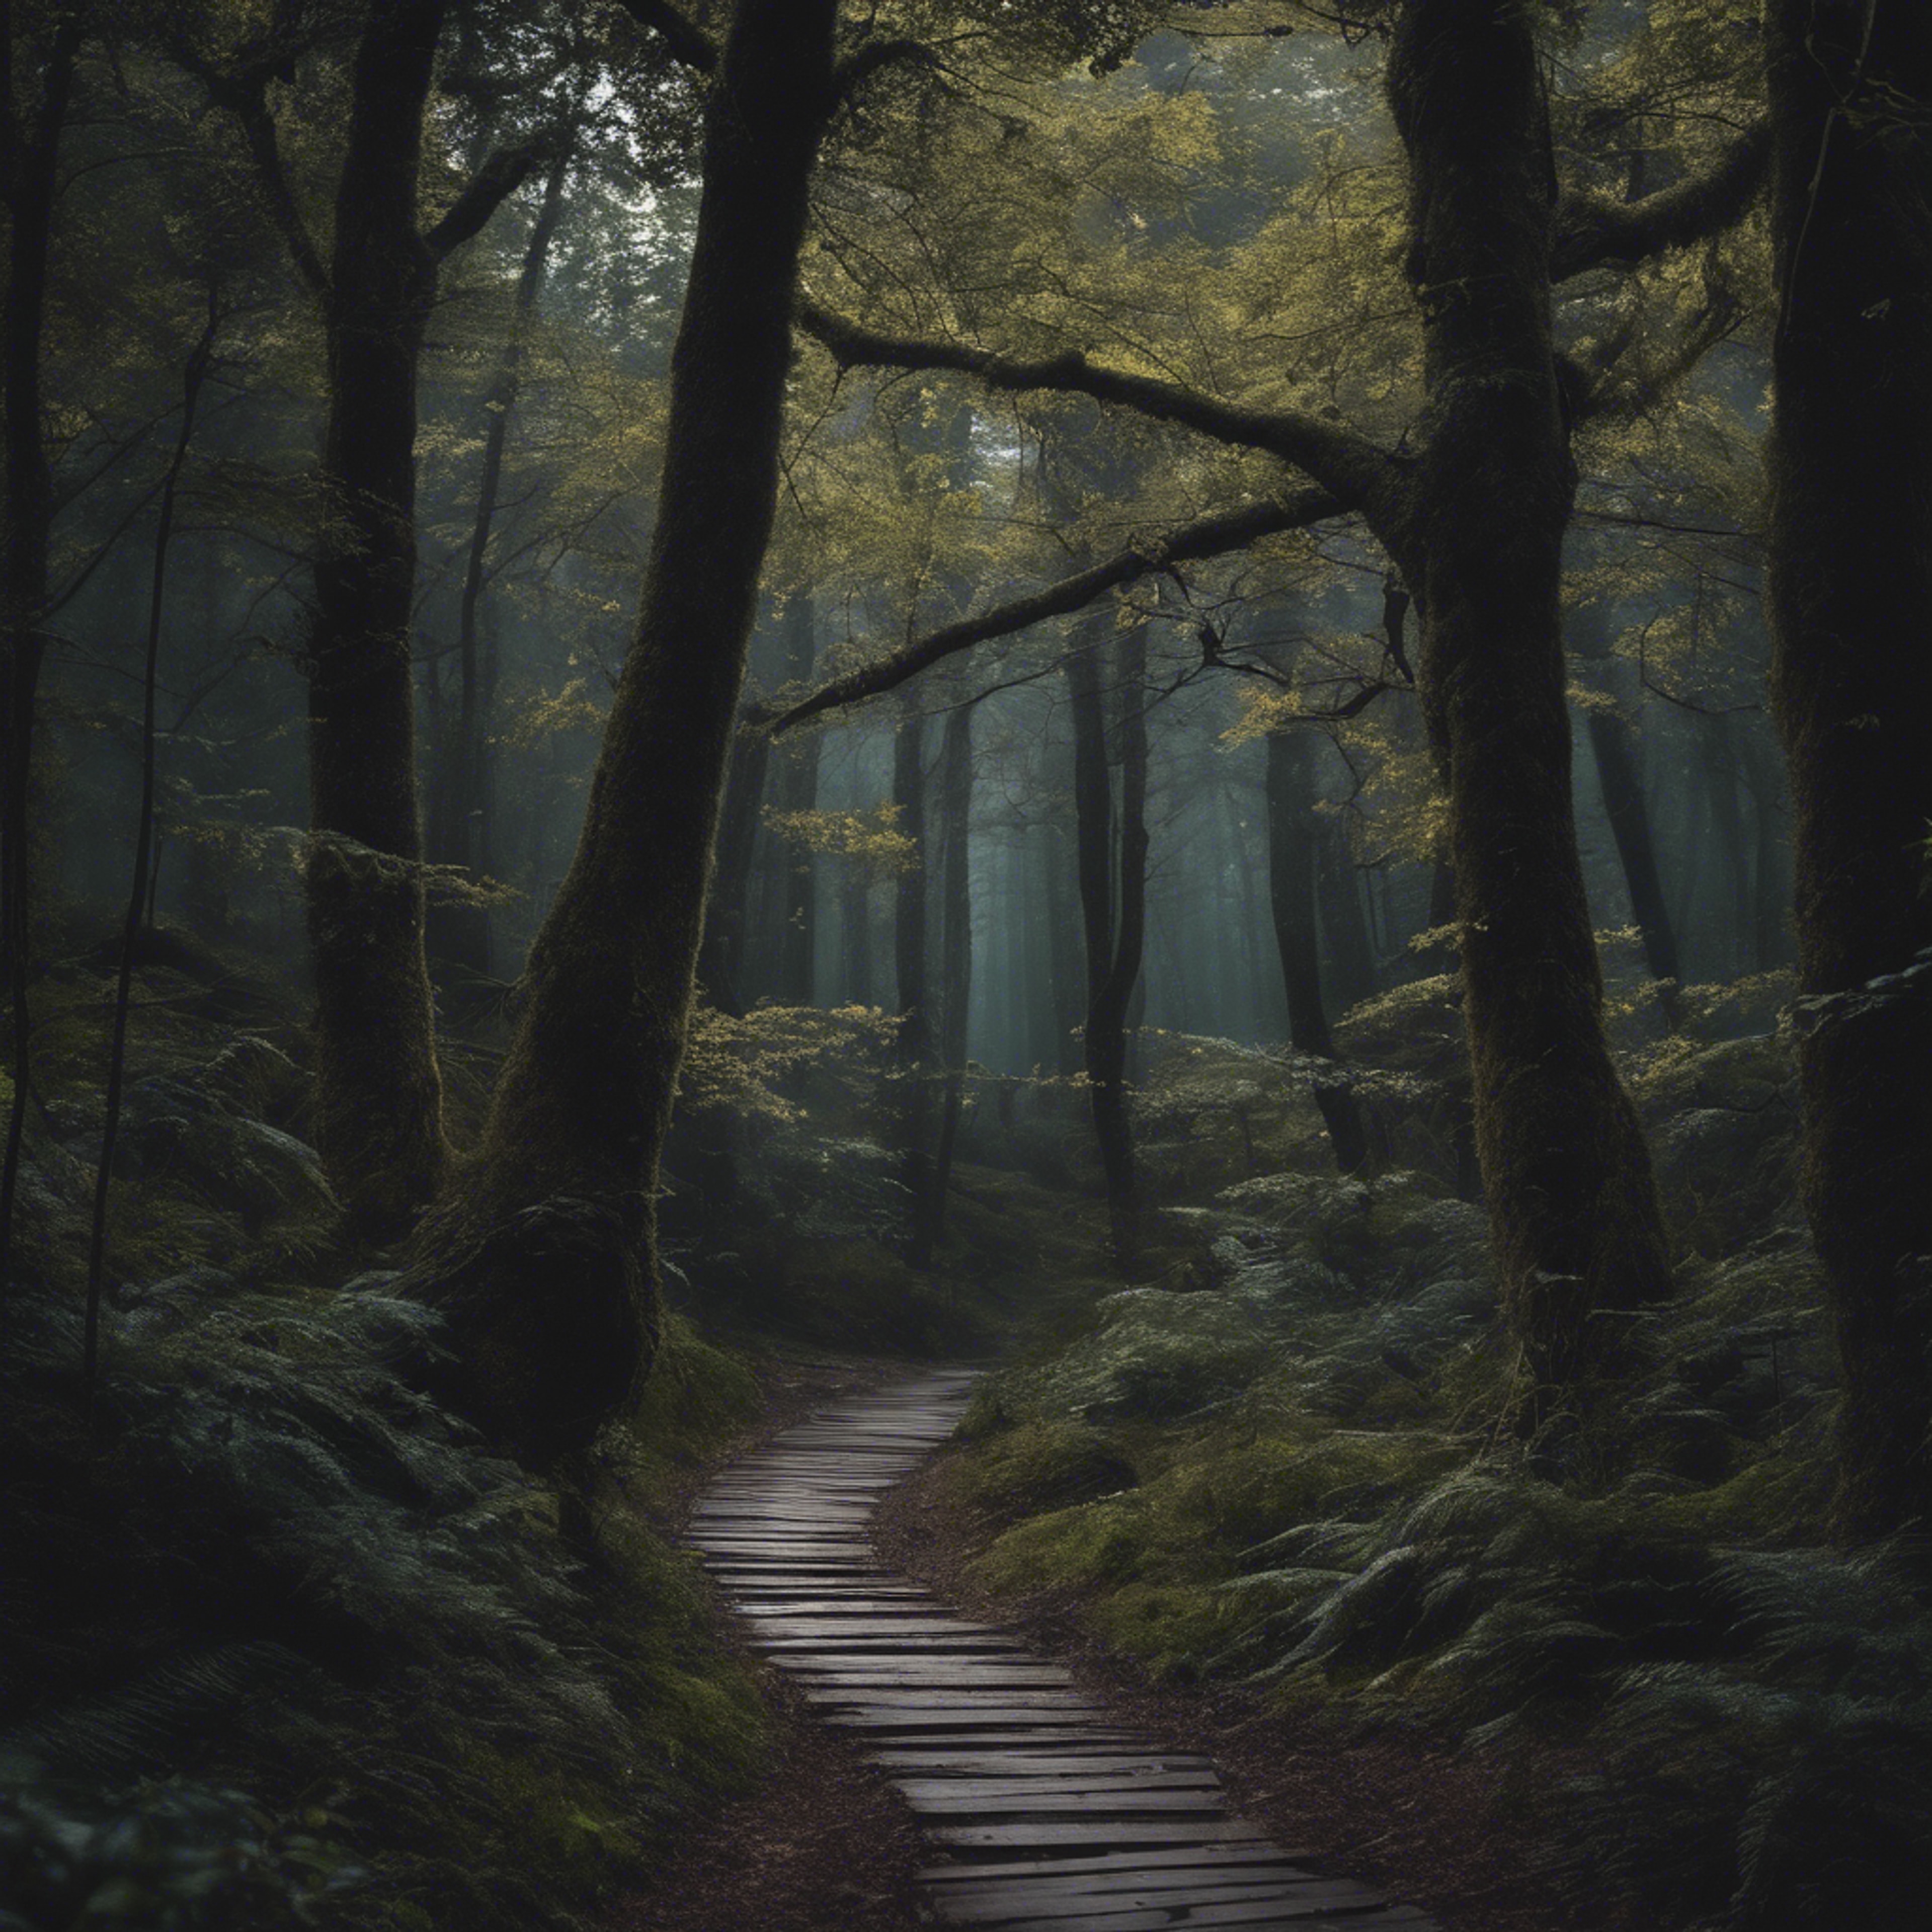 An untraveled path in a dark and mysterious forest壁紙[df6a1d860b87482e8c75]